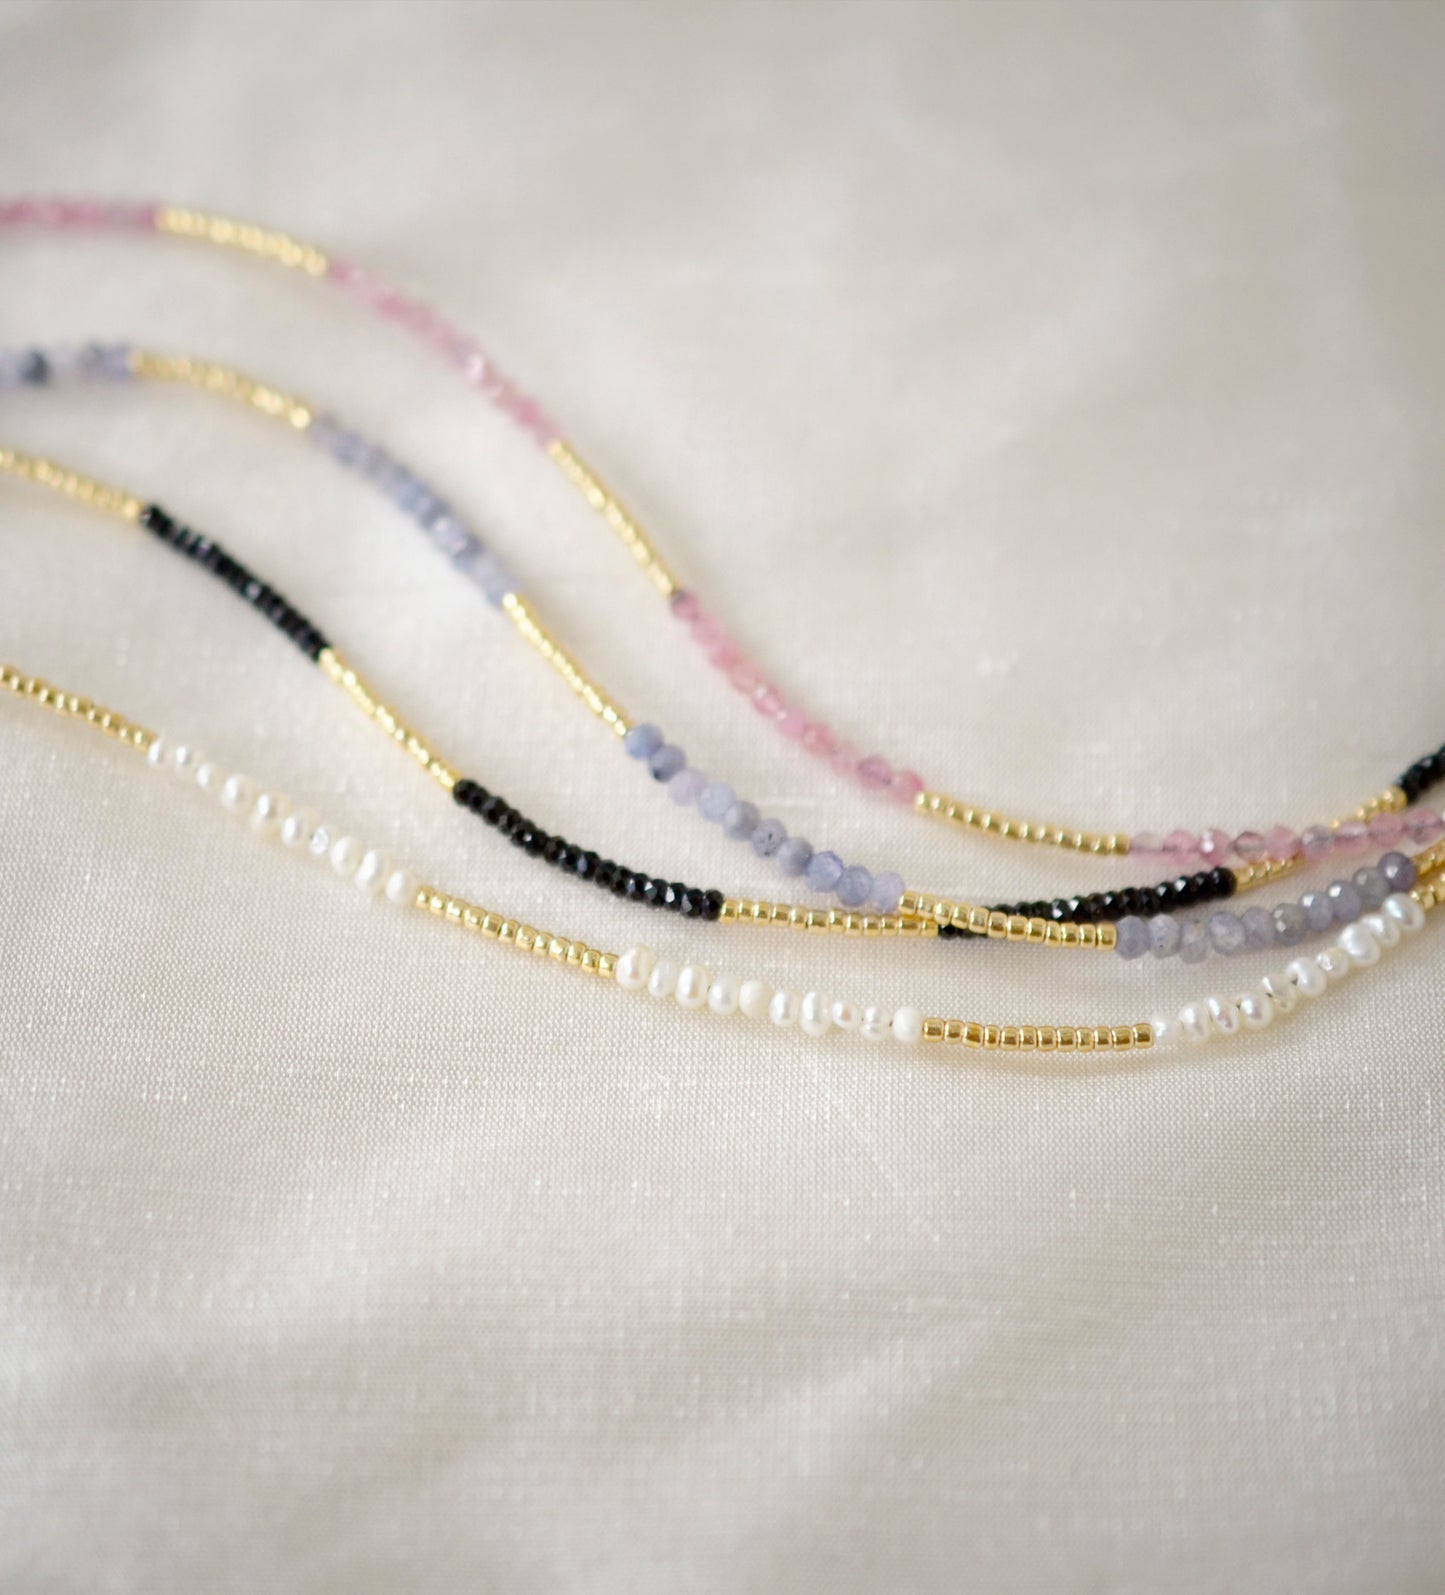 Beaded White Pearl Necklace in Sterling Silver or 14k Gold Filled